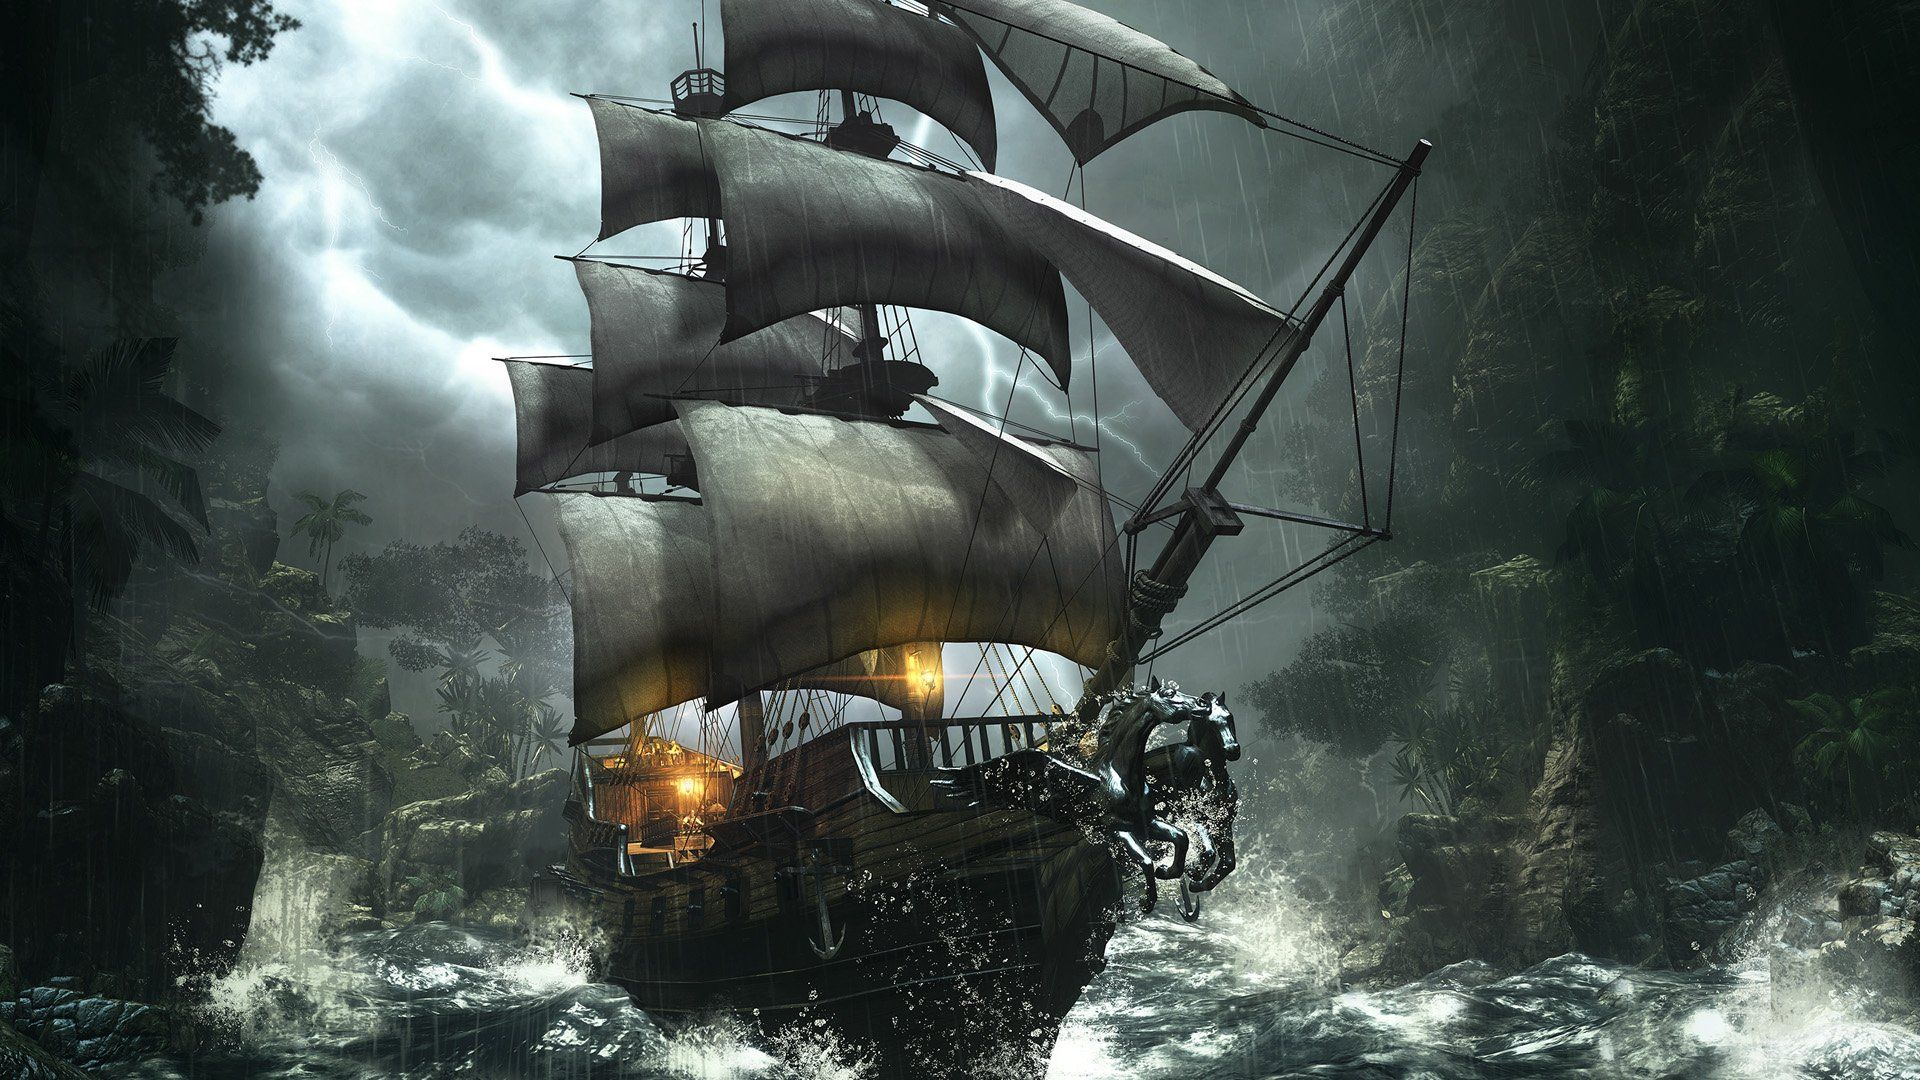 1920x1080 RAVENS CRY fantasy action adventure rpg pirate ship wallpaper | | 493850 | Ship paintings, Pirate pictures, Pirate ship